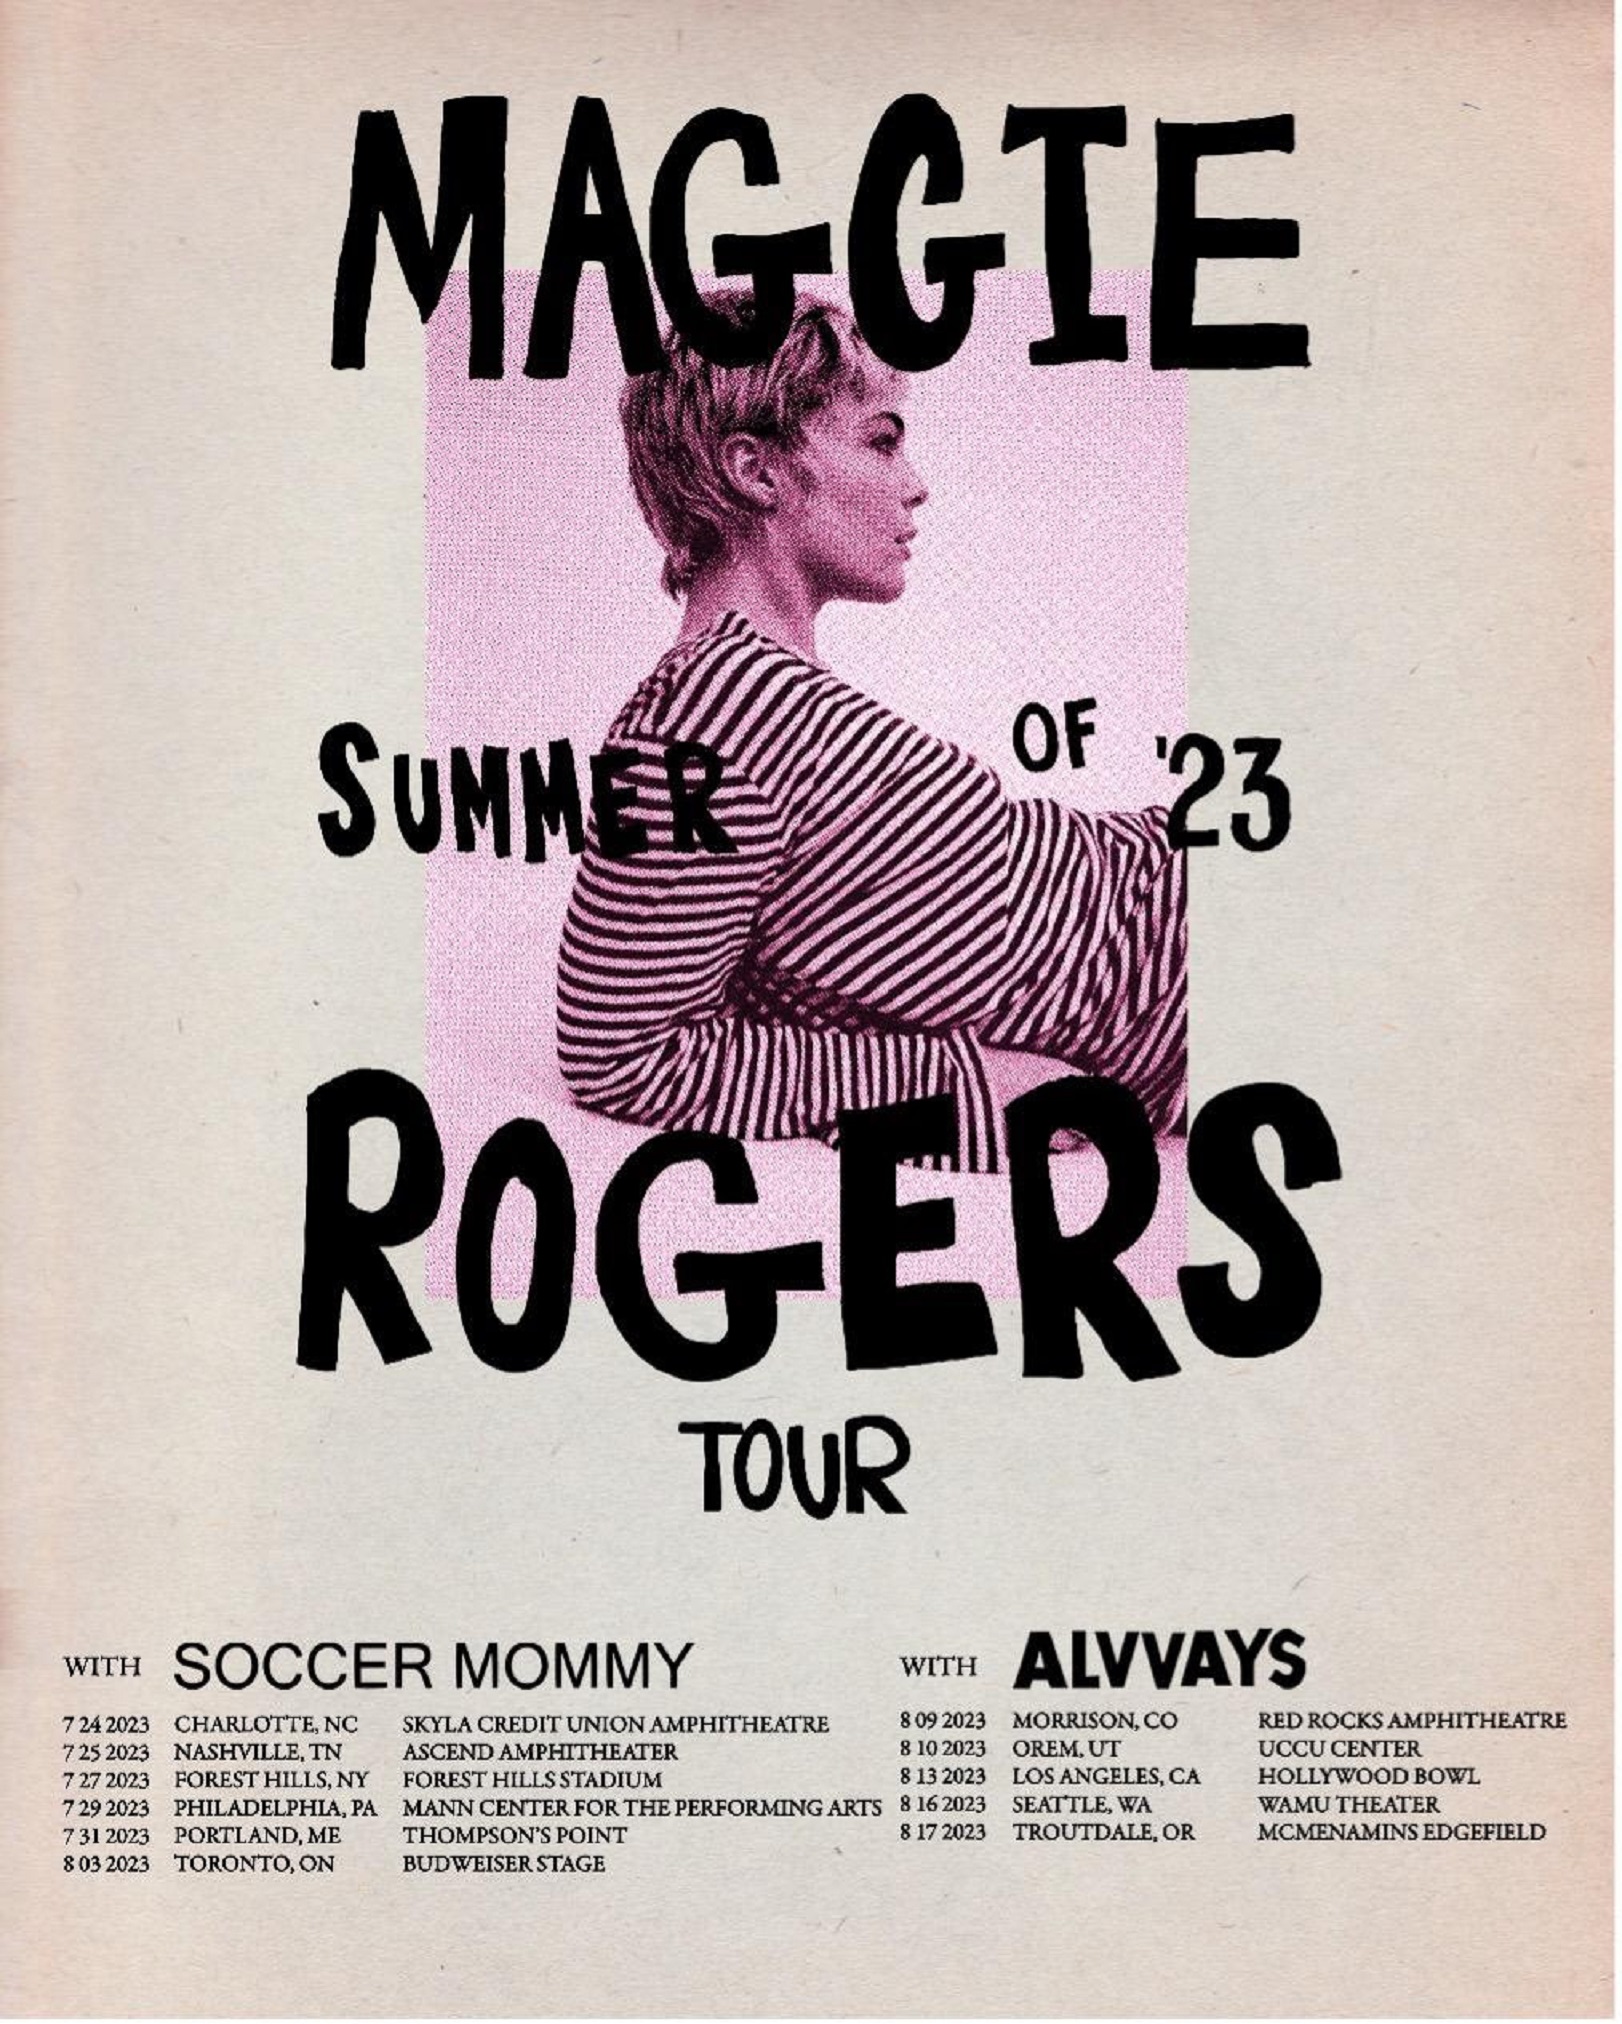 MAGGIE ROGERS ANNOUNCES “SUMMER OF ’23 TOUR”